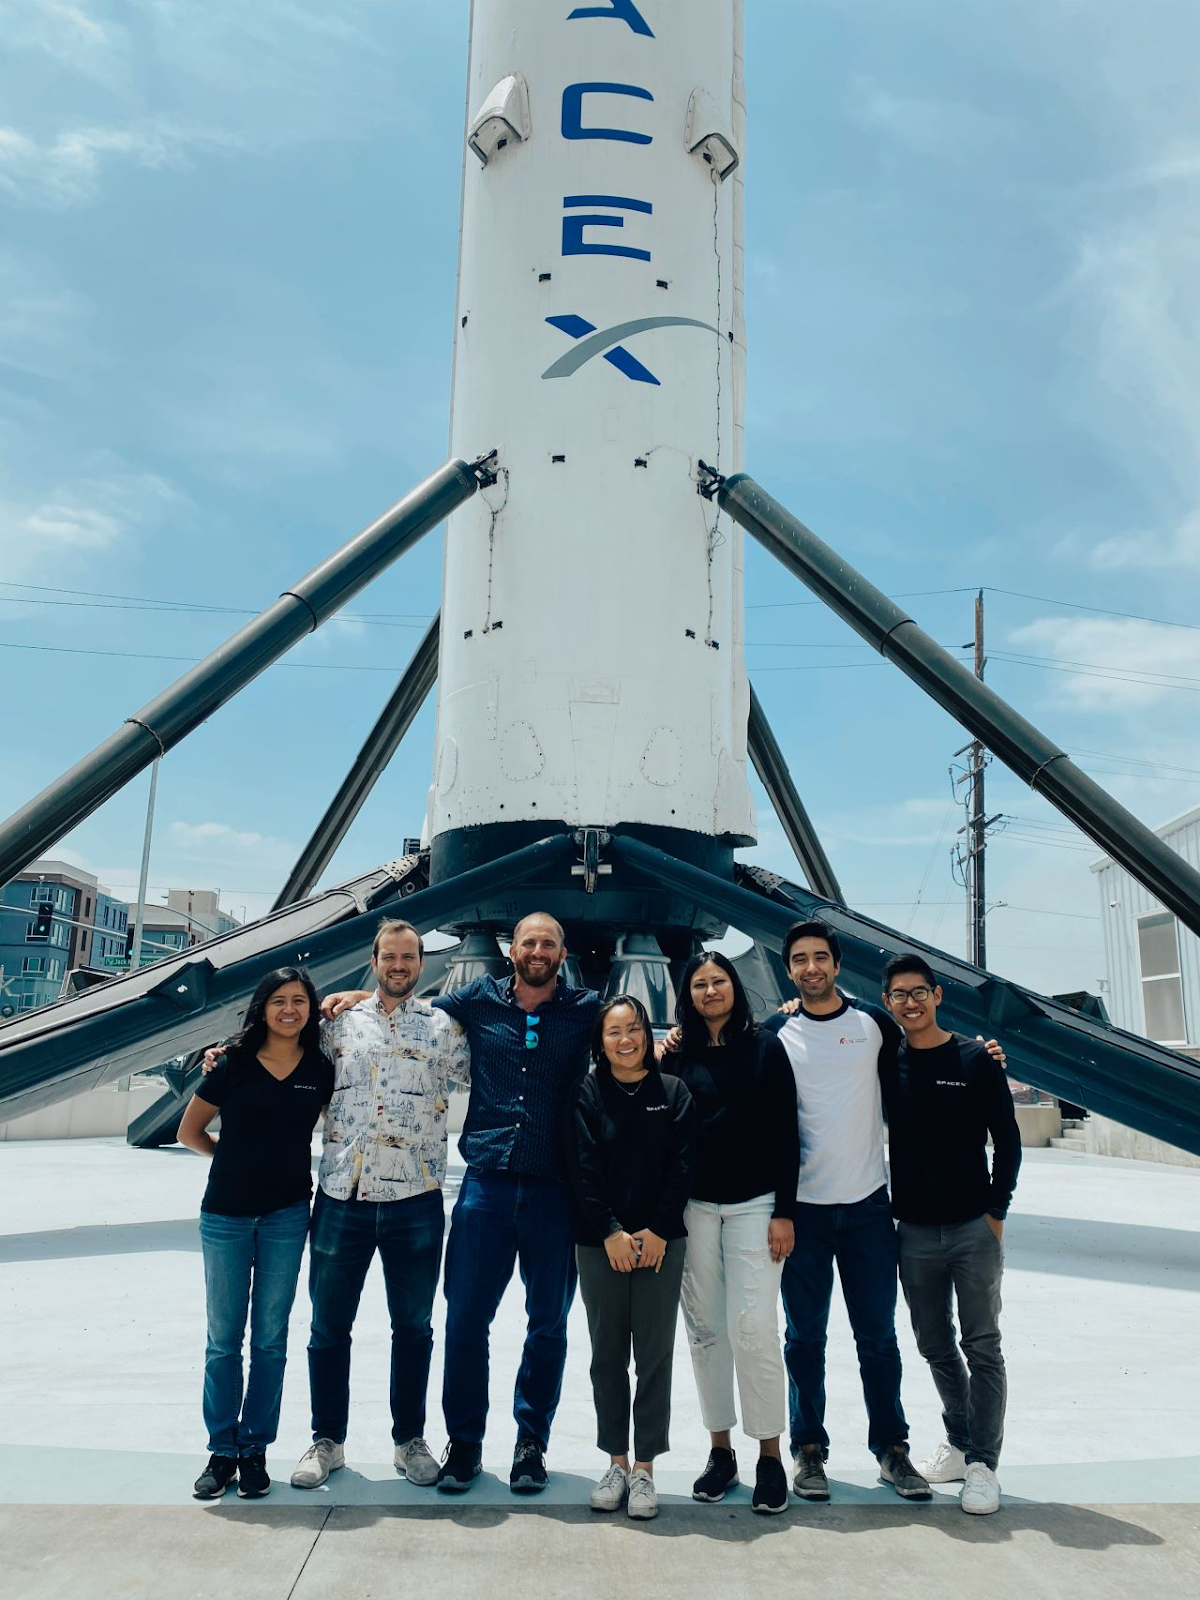 A group of coworkers pose in front of a SpaceX rocket on a sunny day.